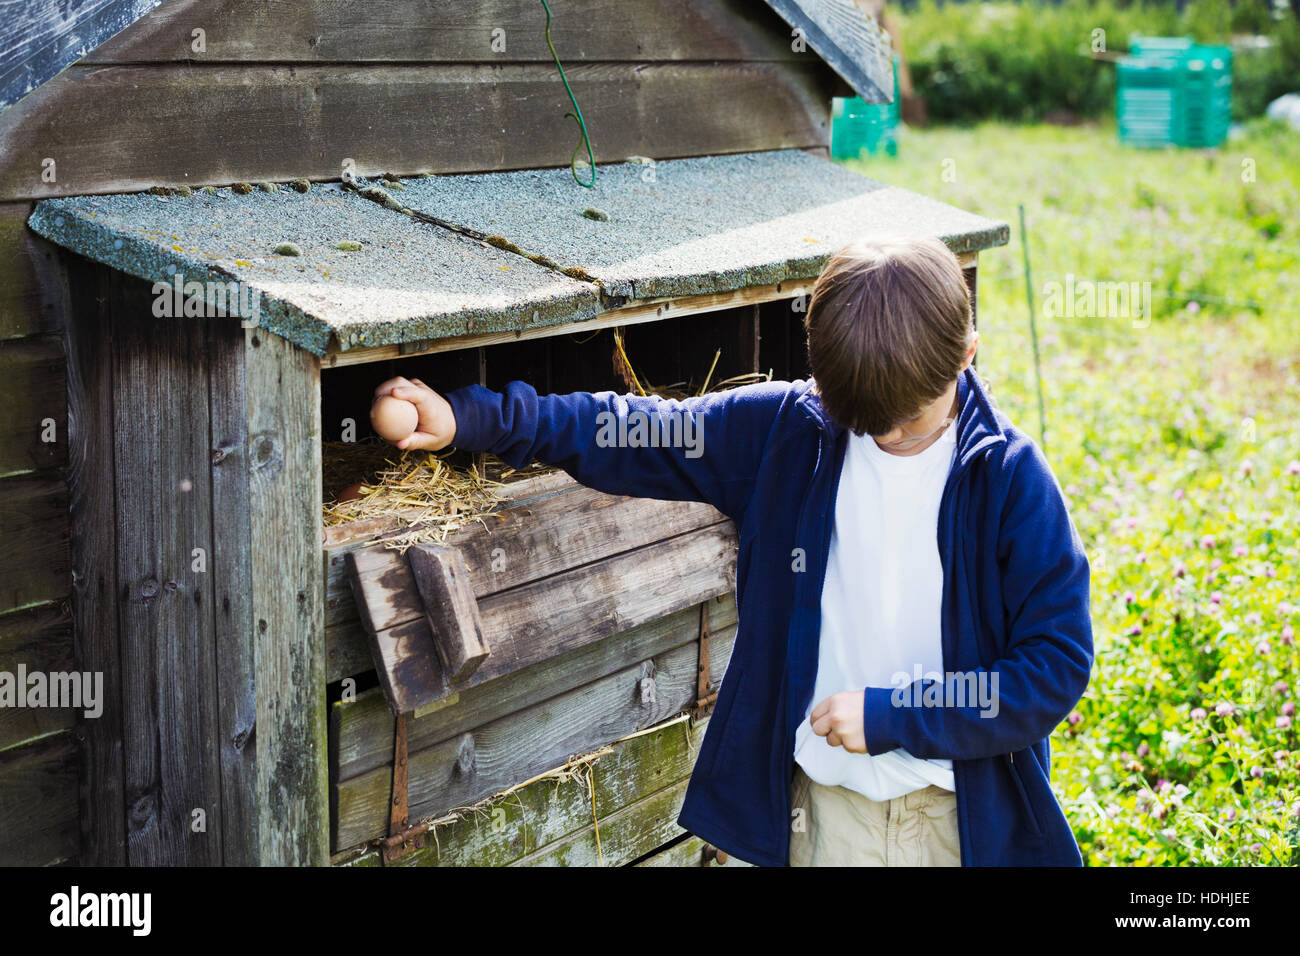 A boy collecting eggs from the henhouse coop. Stock Photo